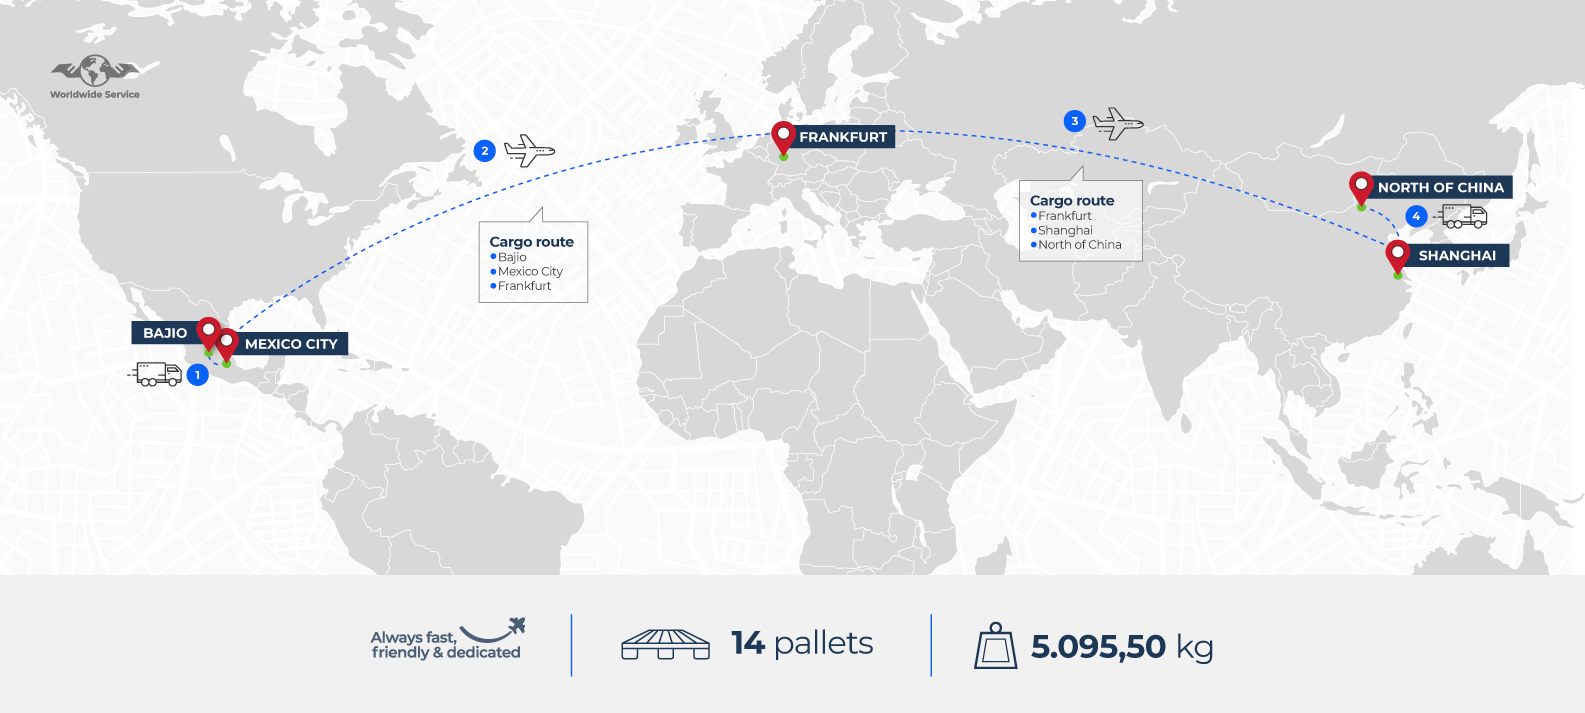 Over a map between Mexico and China, we have drawn the first mile on ground freight, from Bajio to Mexico City, then the Air freight route, MEX-FRA-PVG, and the last mile, from Shanghai-North of China. Volume moved: 14 pallets, 5.095,50 kg